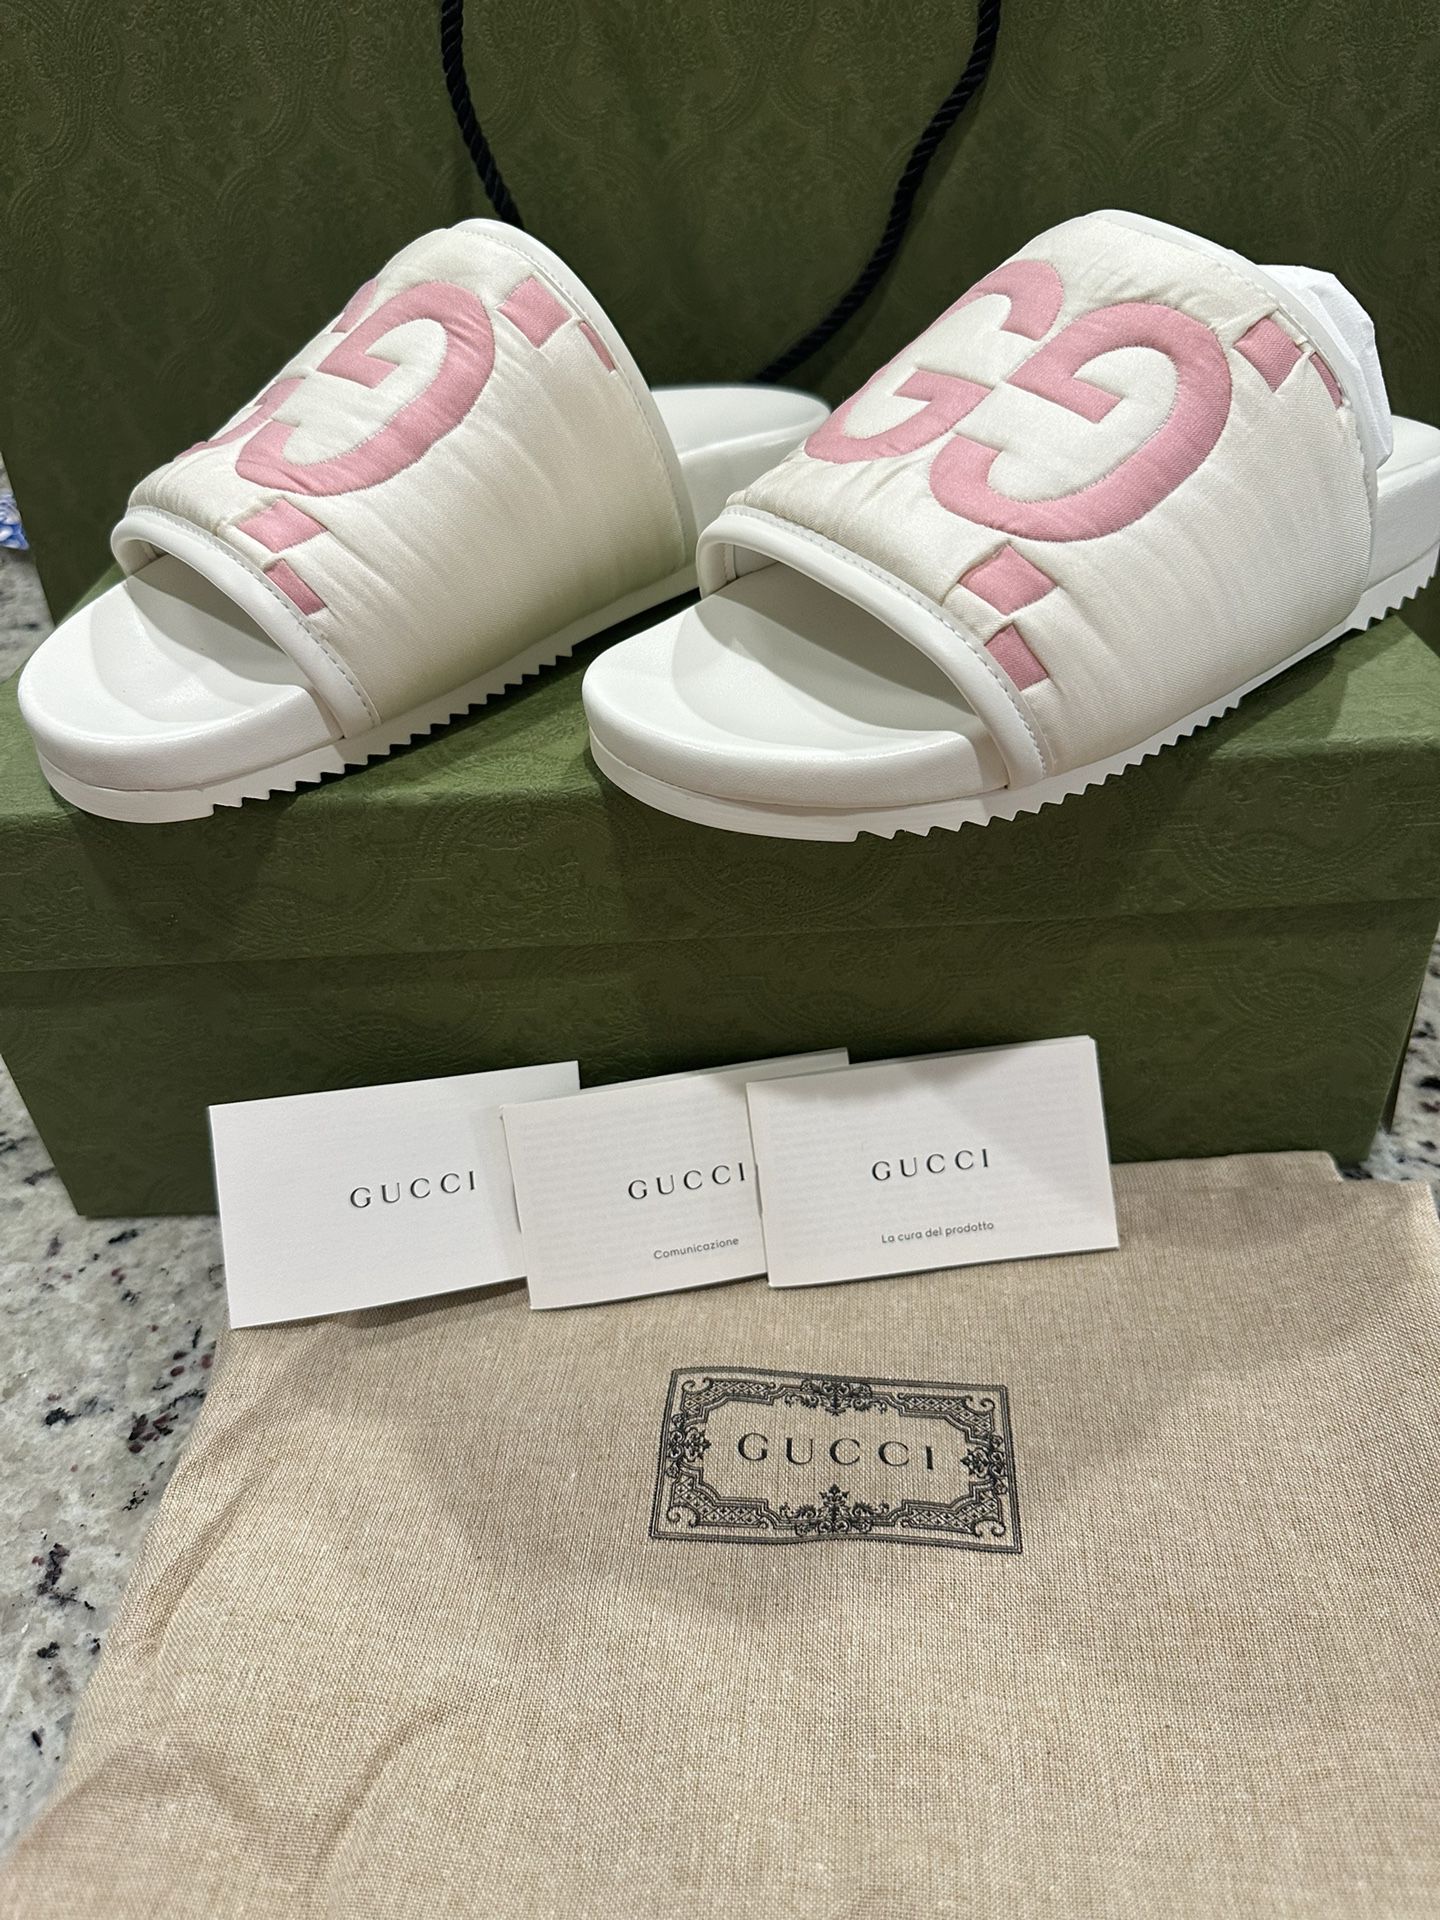 Authentic Gucci  US 9 Women padded Slides 